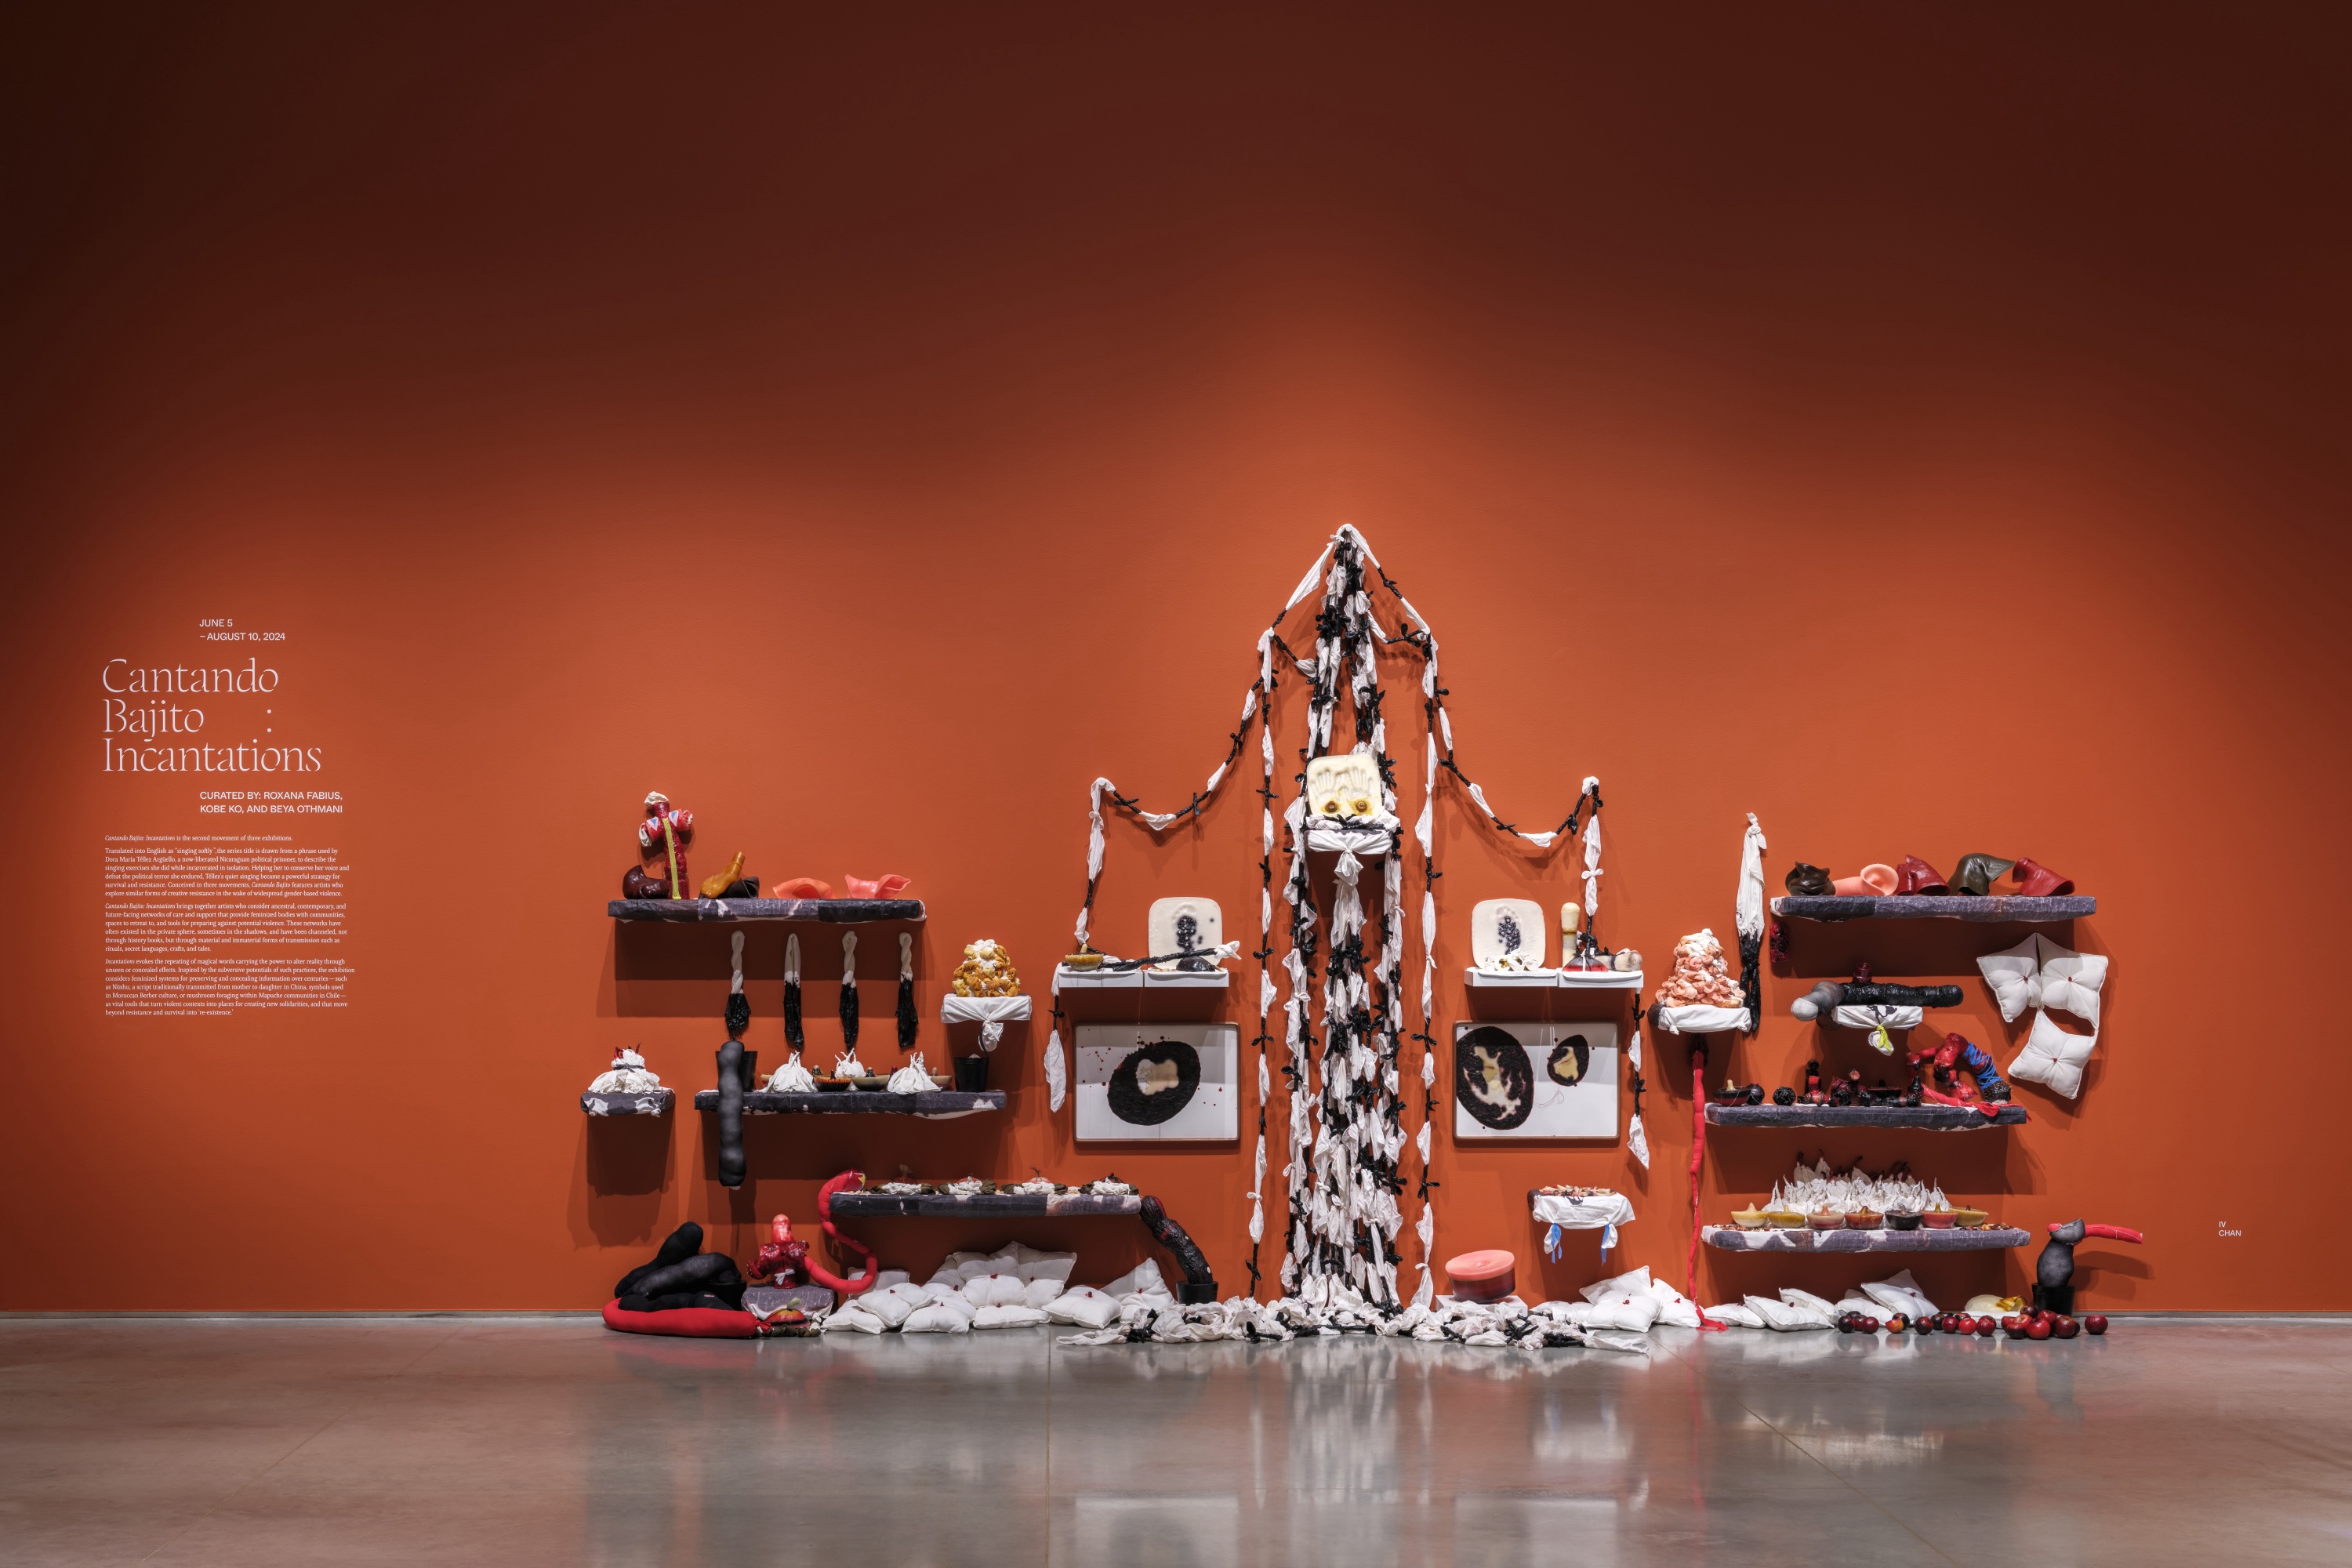 A terracotta-red wall connecting to a gray floor. On the left side of the wall is exhibition text with the title “Cantando Bajito: Incantations”. To the middle and right of the wall is a mixed media installation resembling a shrine with soft sculpture, pillows, fabric chains, and wax molds.